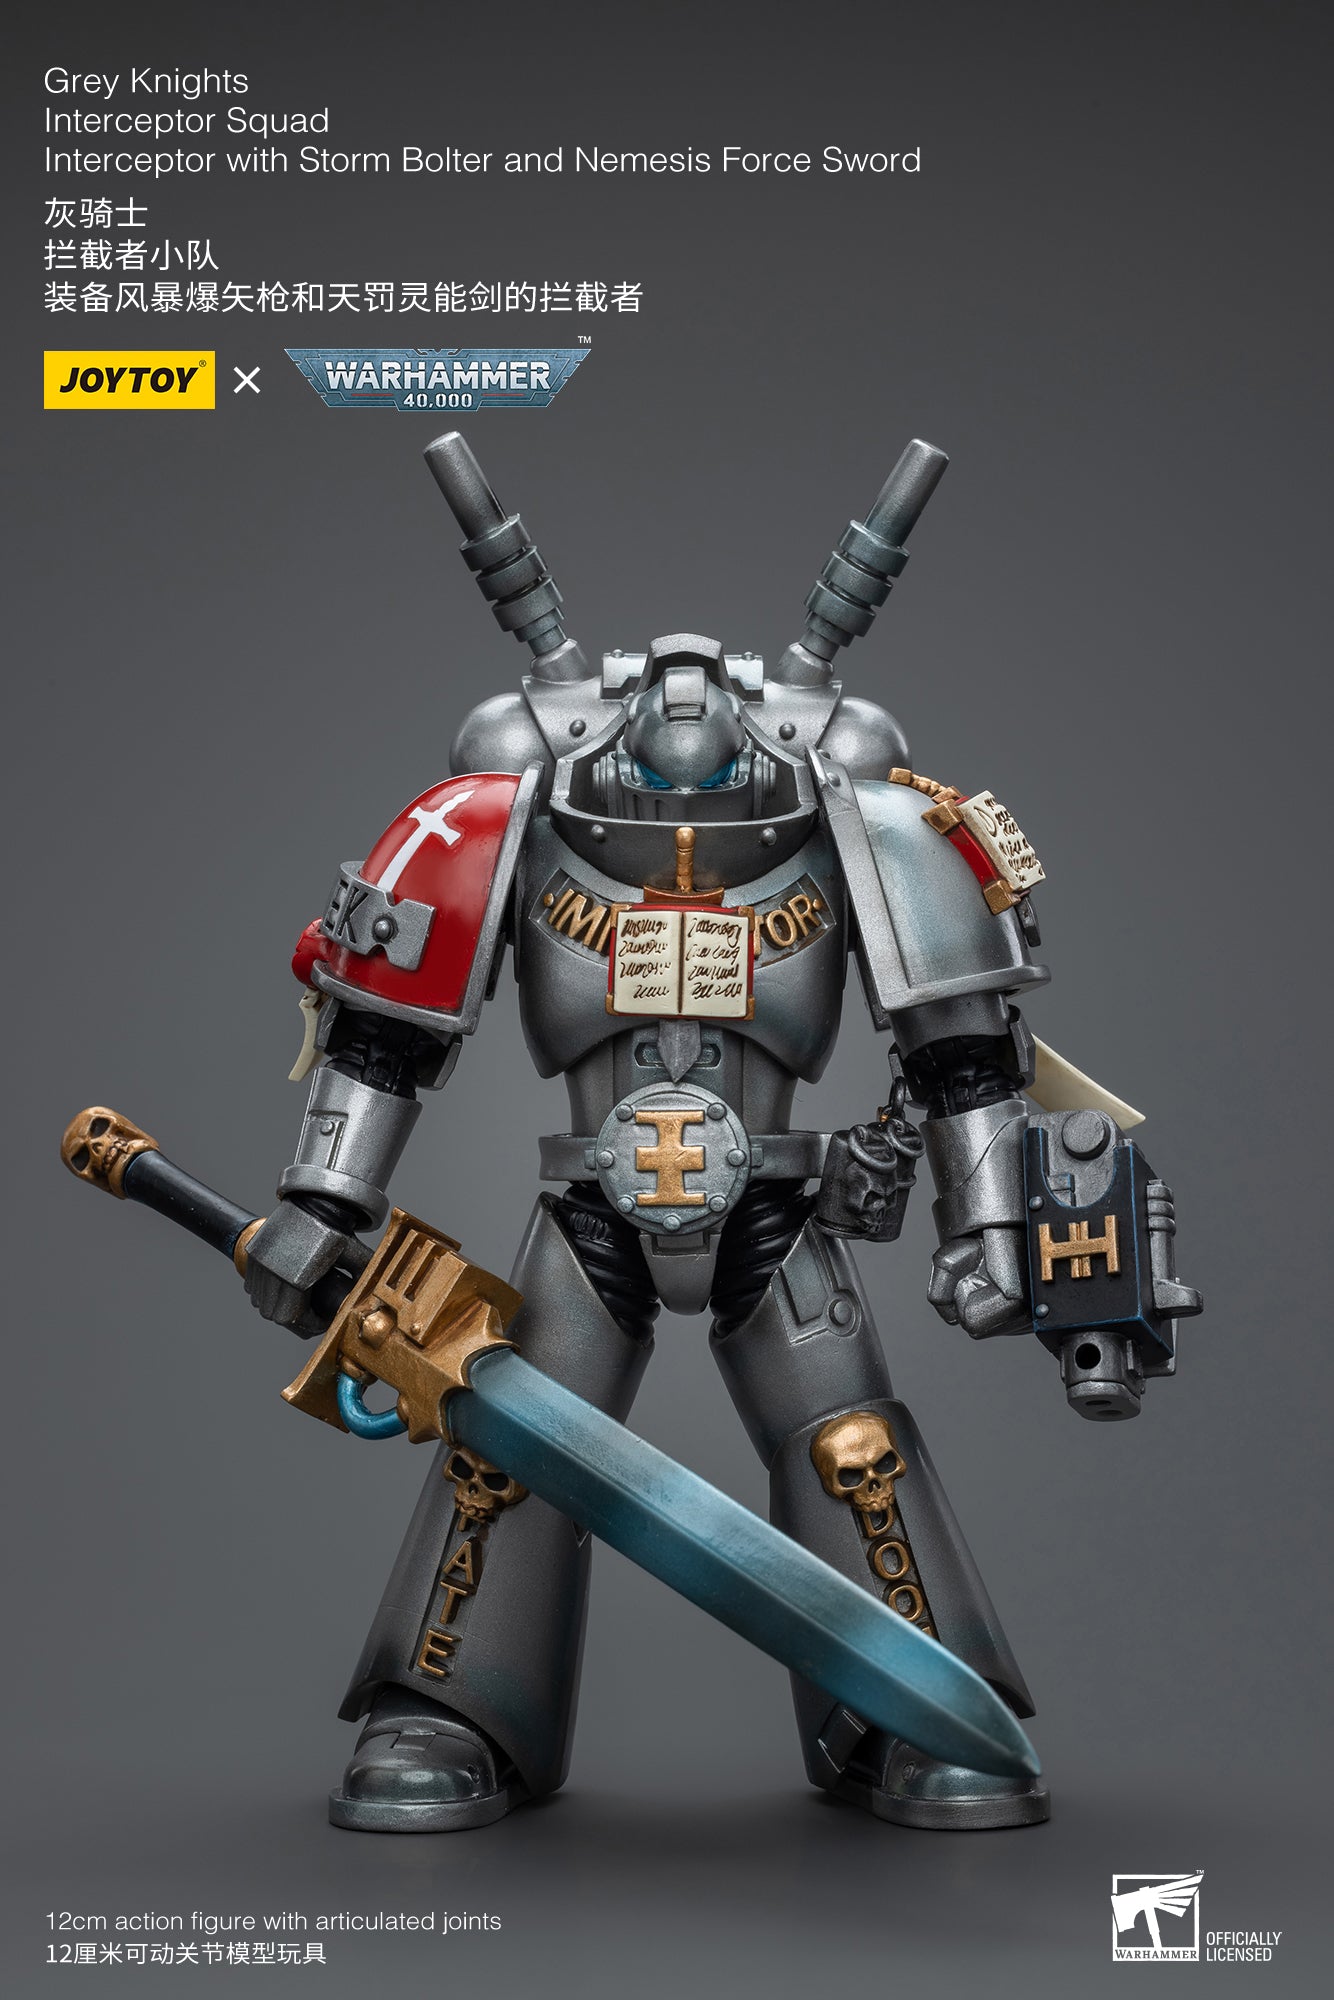 Warhammer 40k: Grey Knights: Interceptor with Storm Bolter and Nemesis Force Sword: Joy Toy